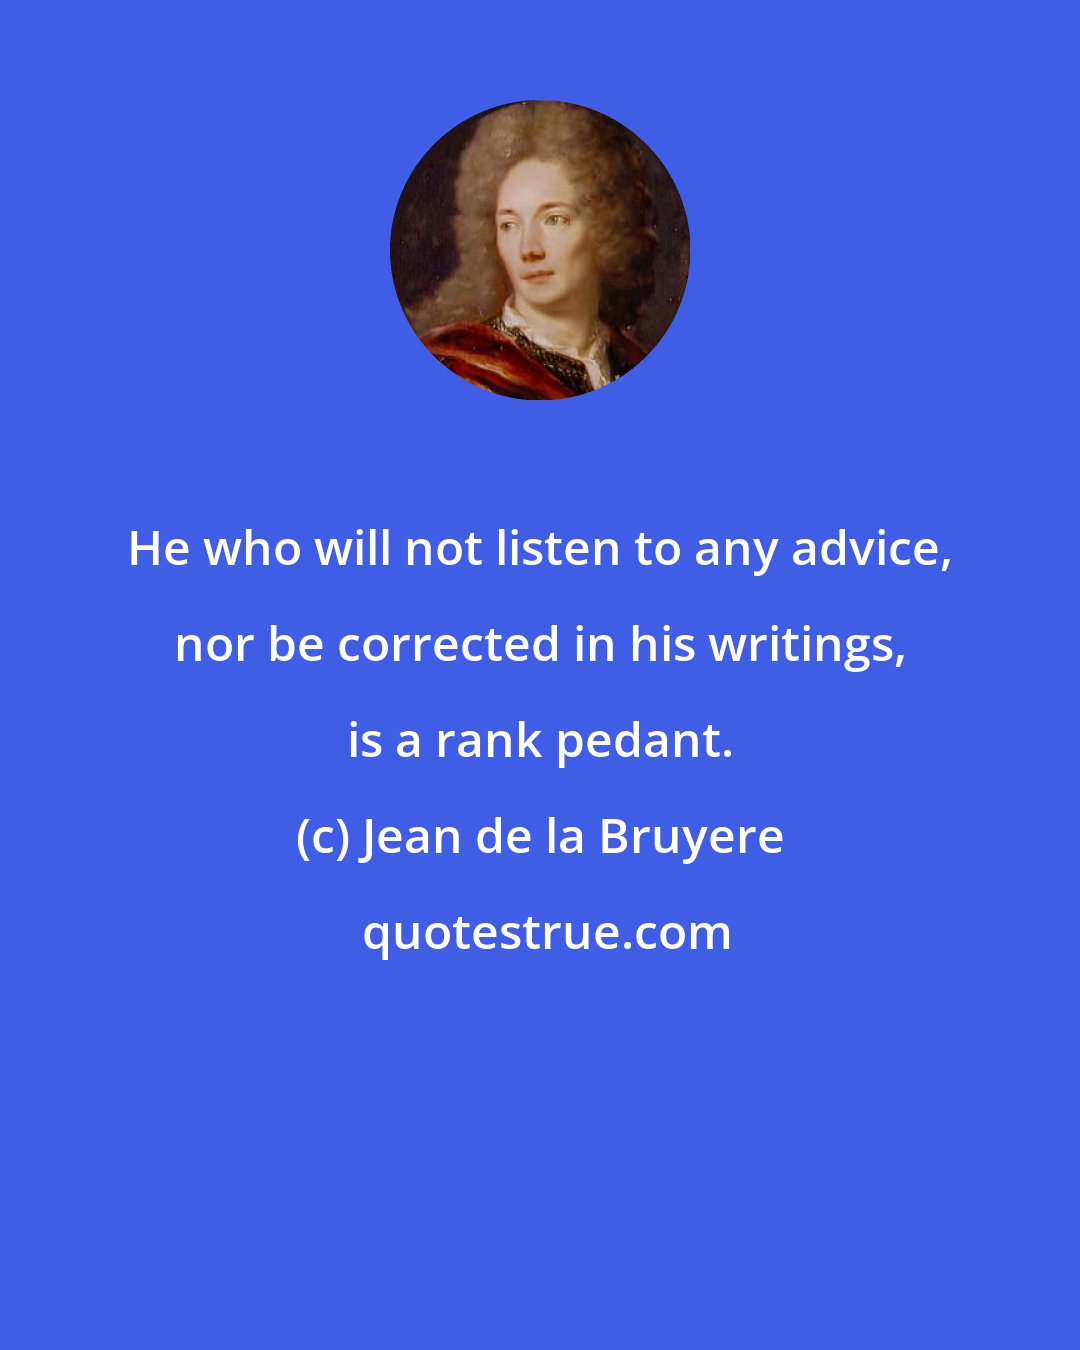 Jean de la Bruyere: He who will not listen to any advice, nor be corrected in his writings, is a rank pedant.